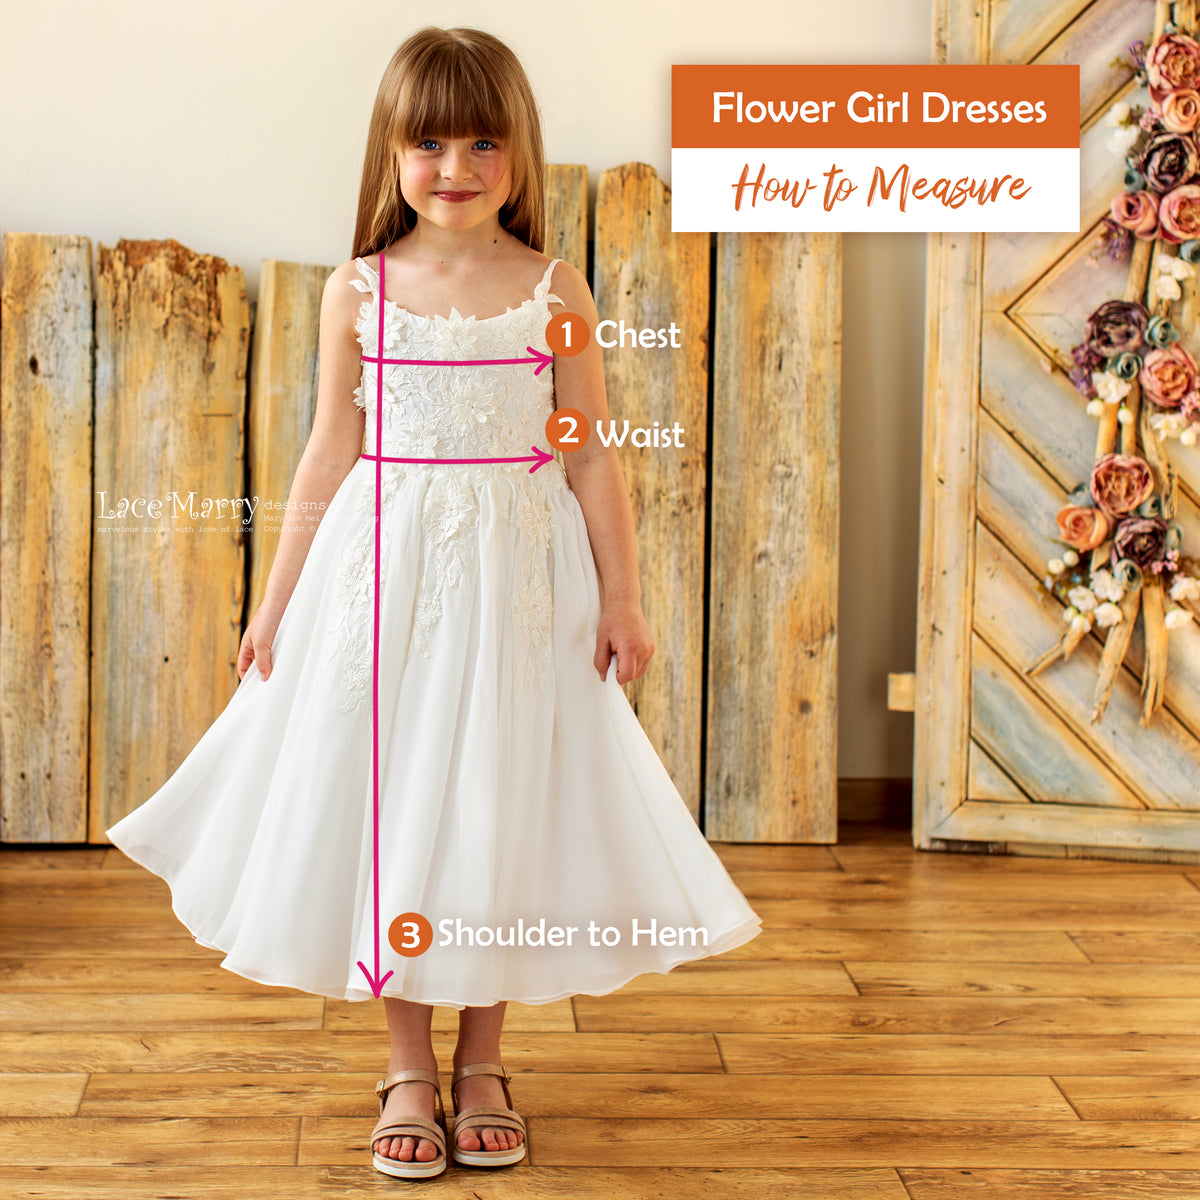 How to Measure a Flower Girl Dress